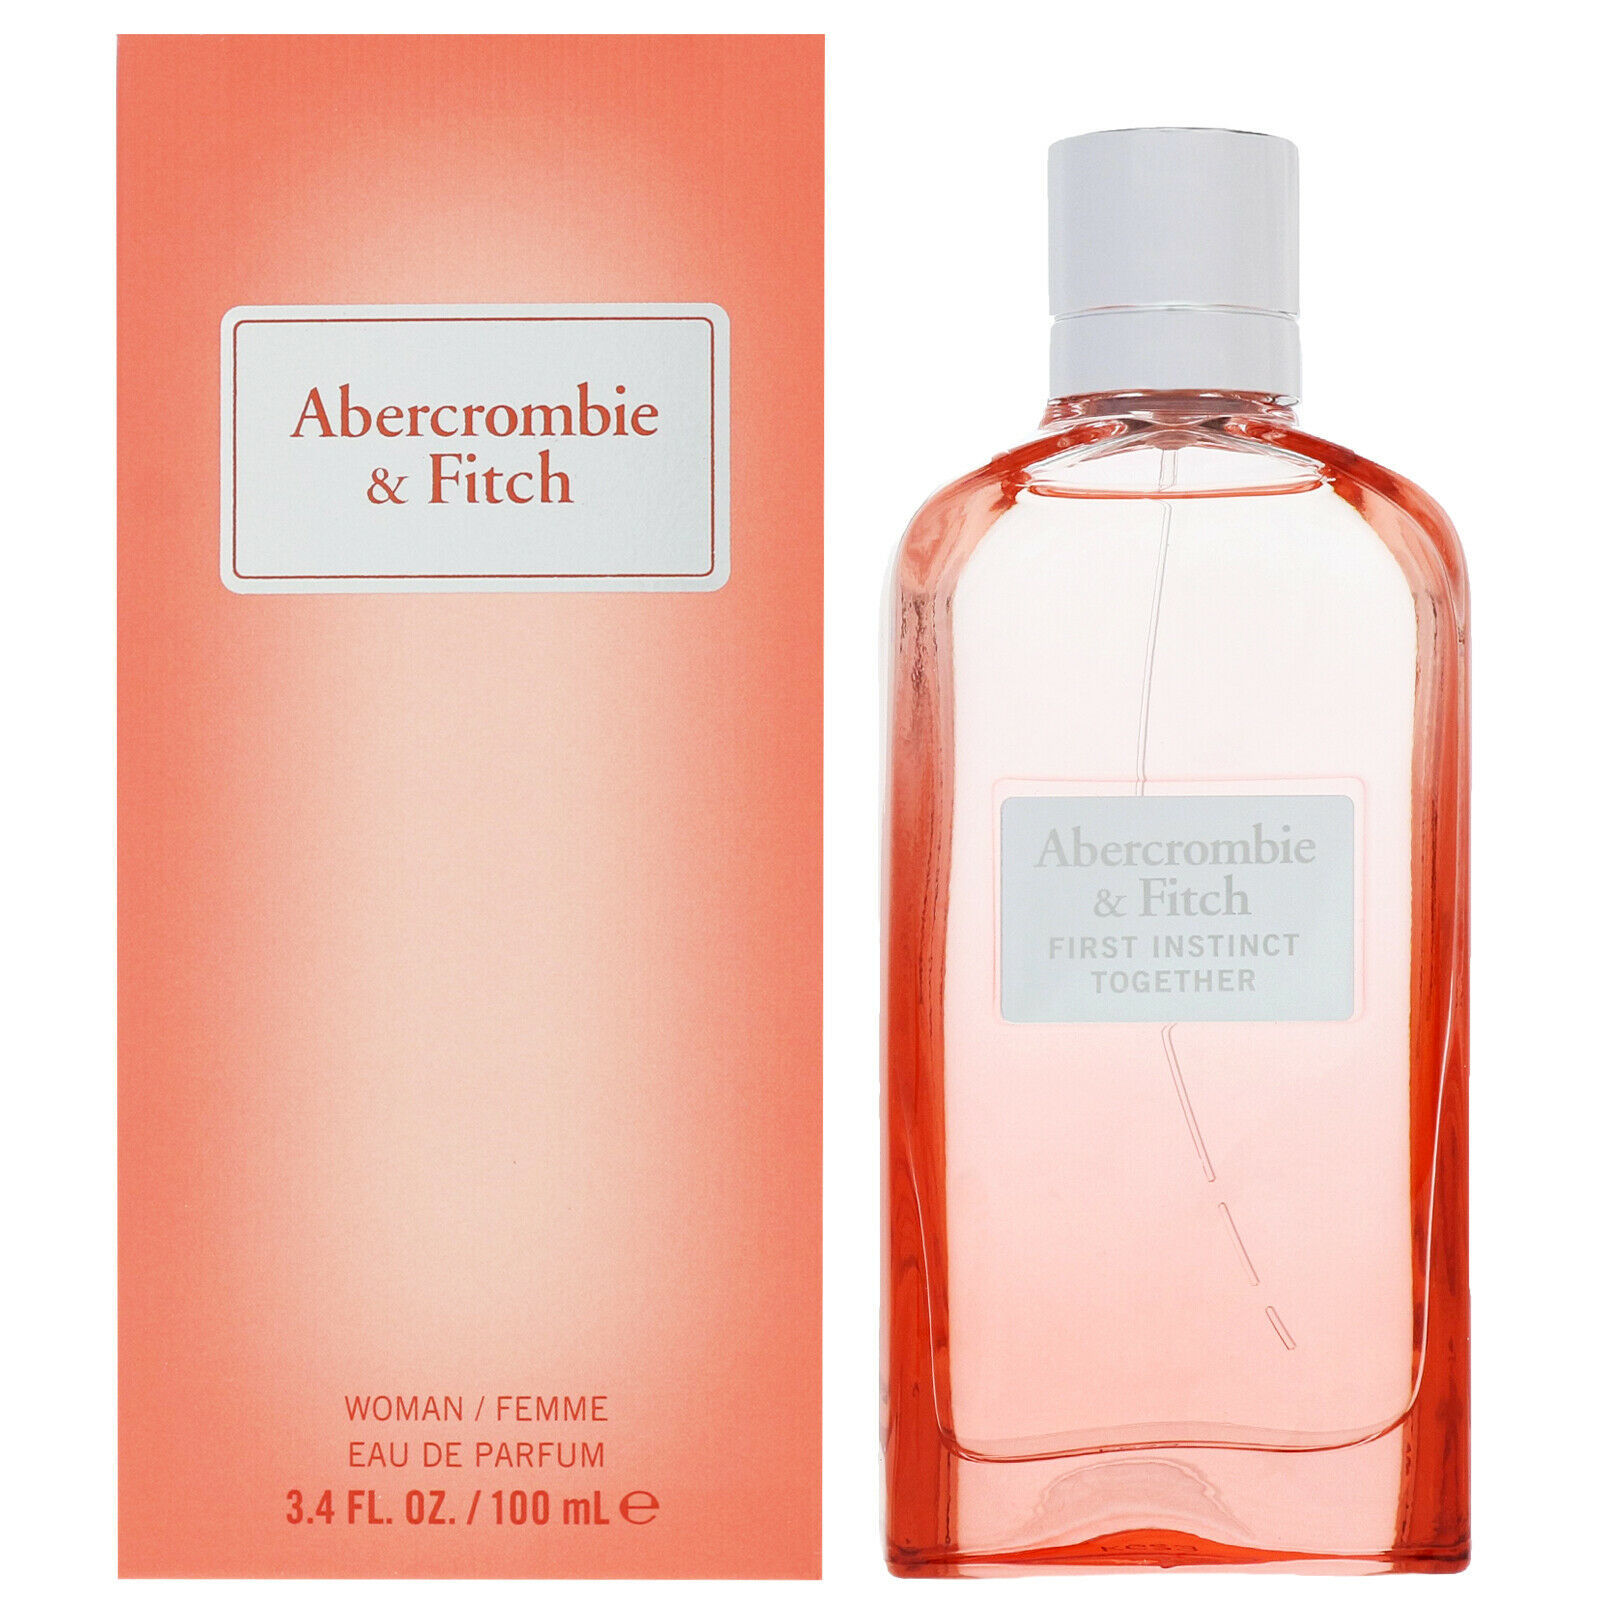 Abercrombie & Fitch - First Instinct Together perfume for Women 3.4 FL ...